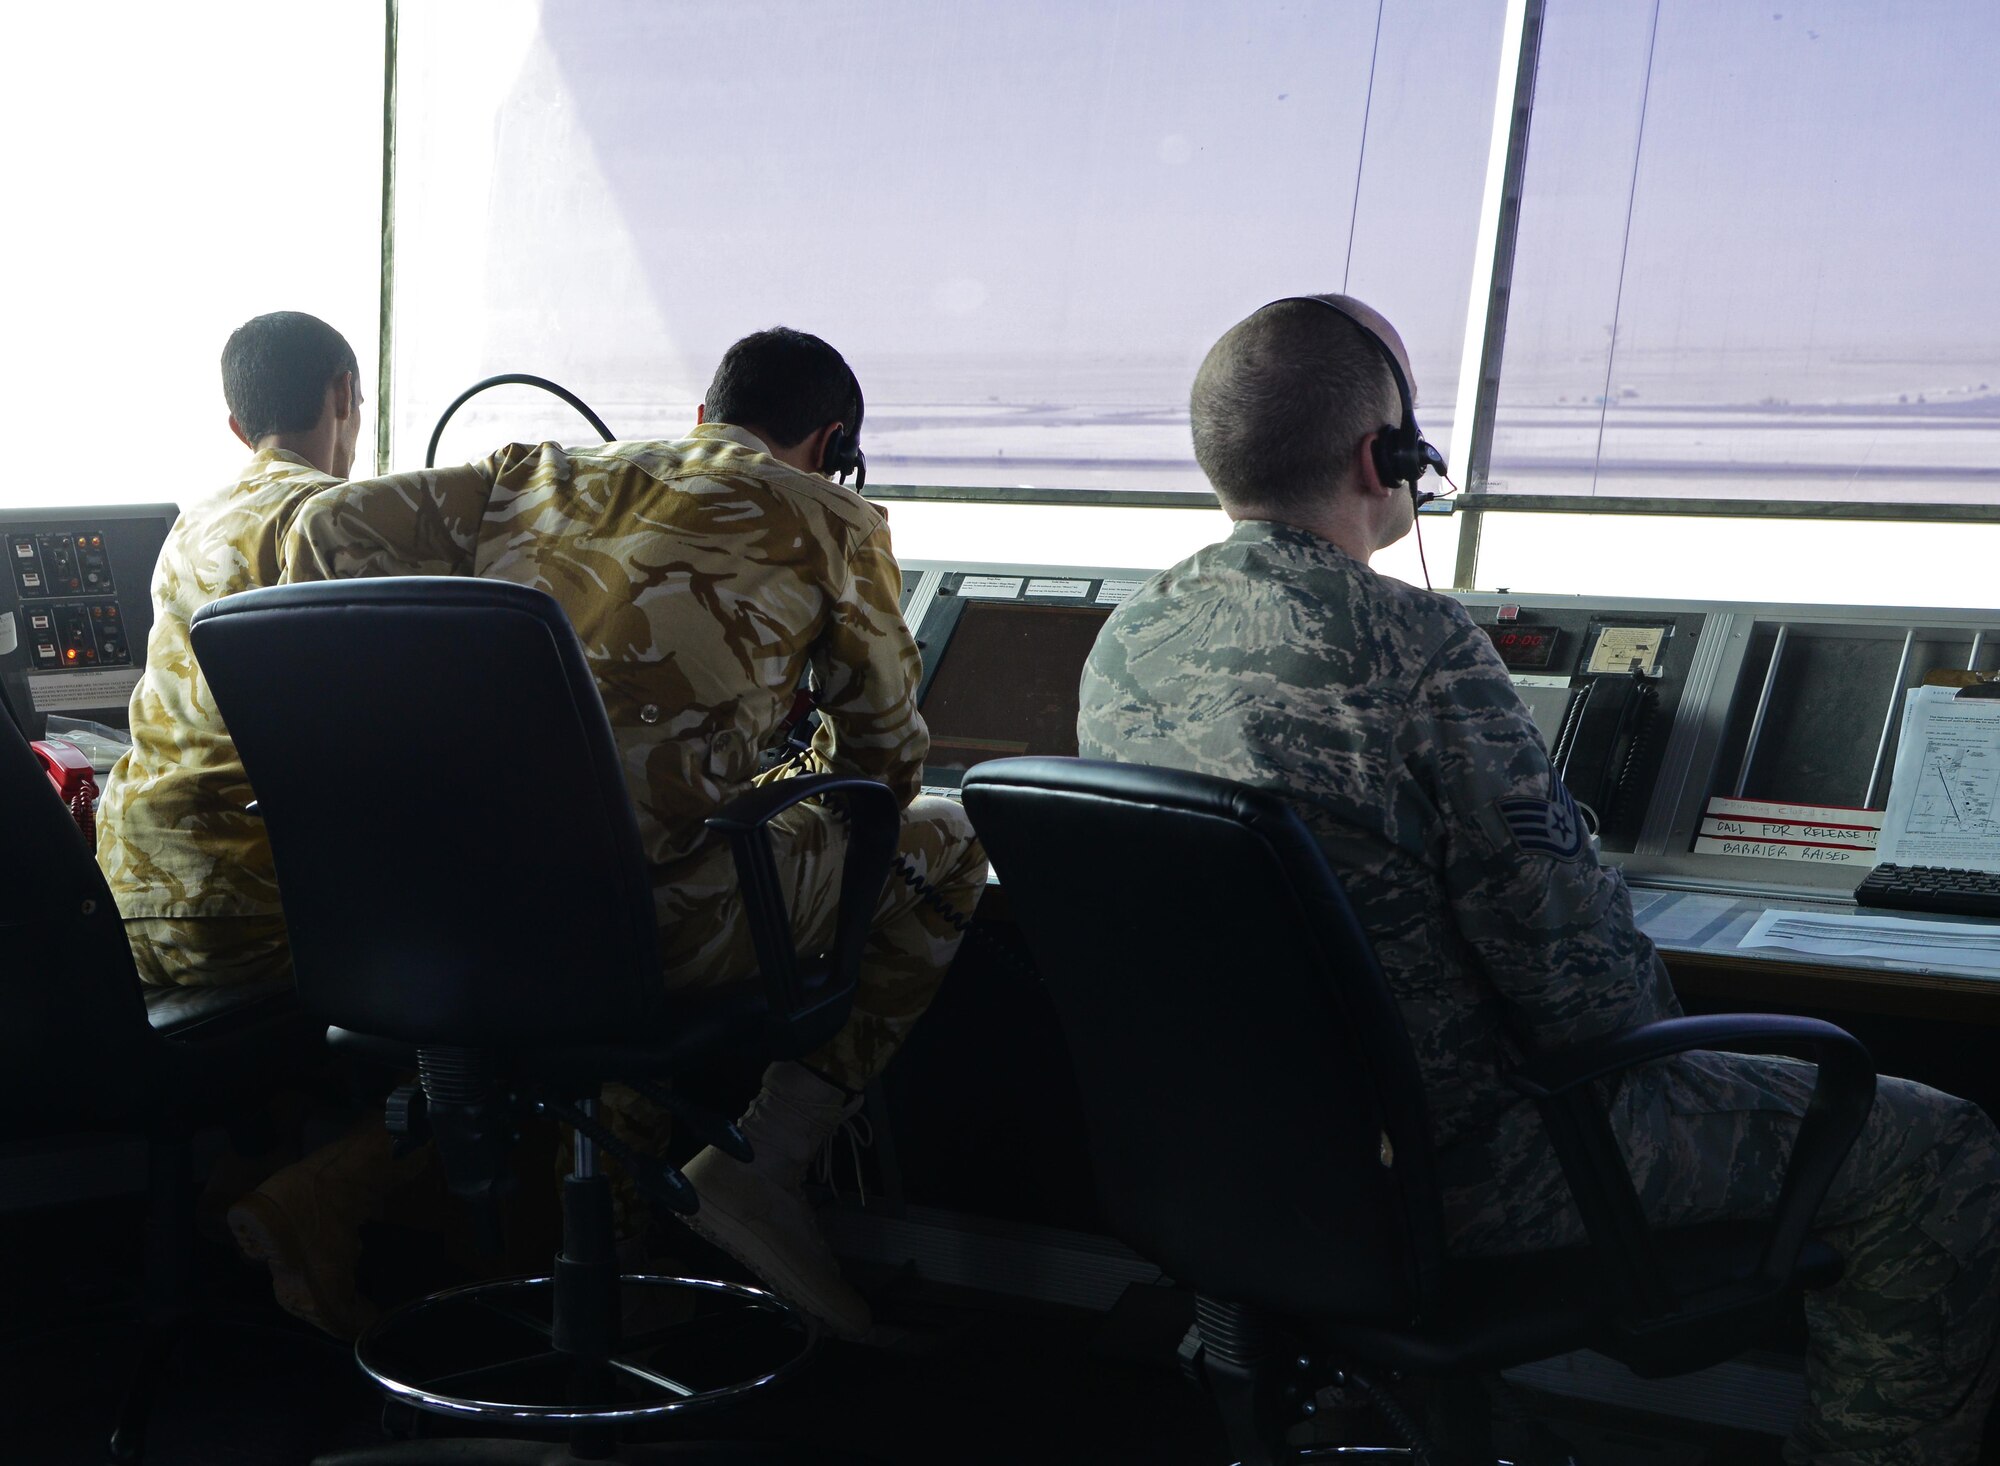 U.S. Air Force and Qatar Emiri Air Force air traffic controllers look out over the airfield, Feb. 17, 2015, at Al Udeid Air Base, Qatar. Airmen assigned to the 379th Expeditionary Operations Support Squadron and Qatari counterparts  work together from the highest vantage point on base –the air traffic control tower— to ensure decisive airpower is generated unobstructed from air traffic congestion.(U.S. Air Force photo by Senior Airman Kia Atkins)